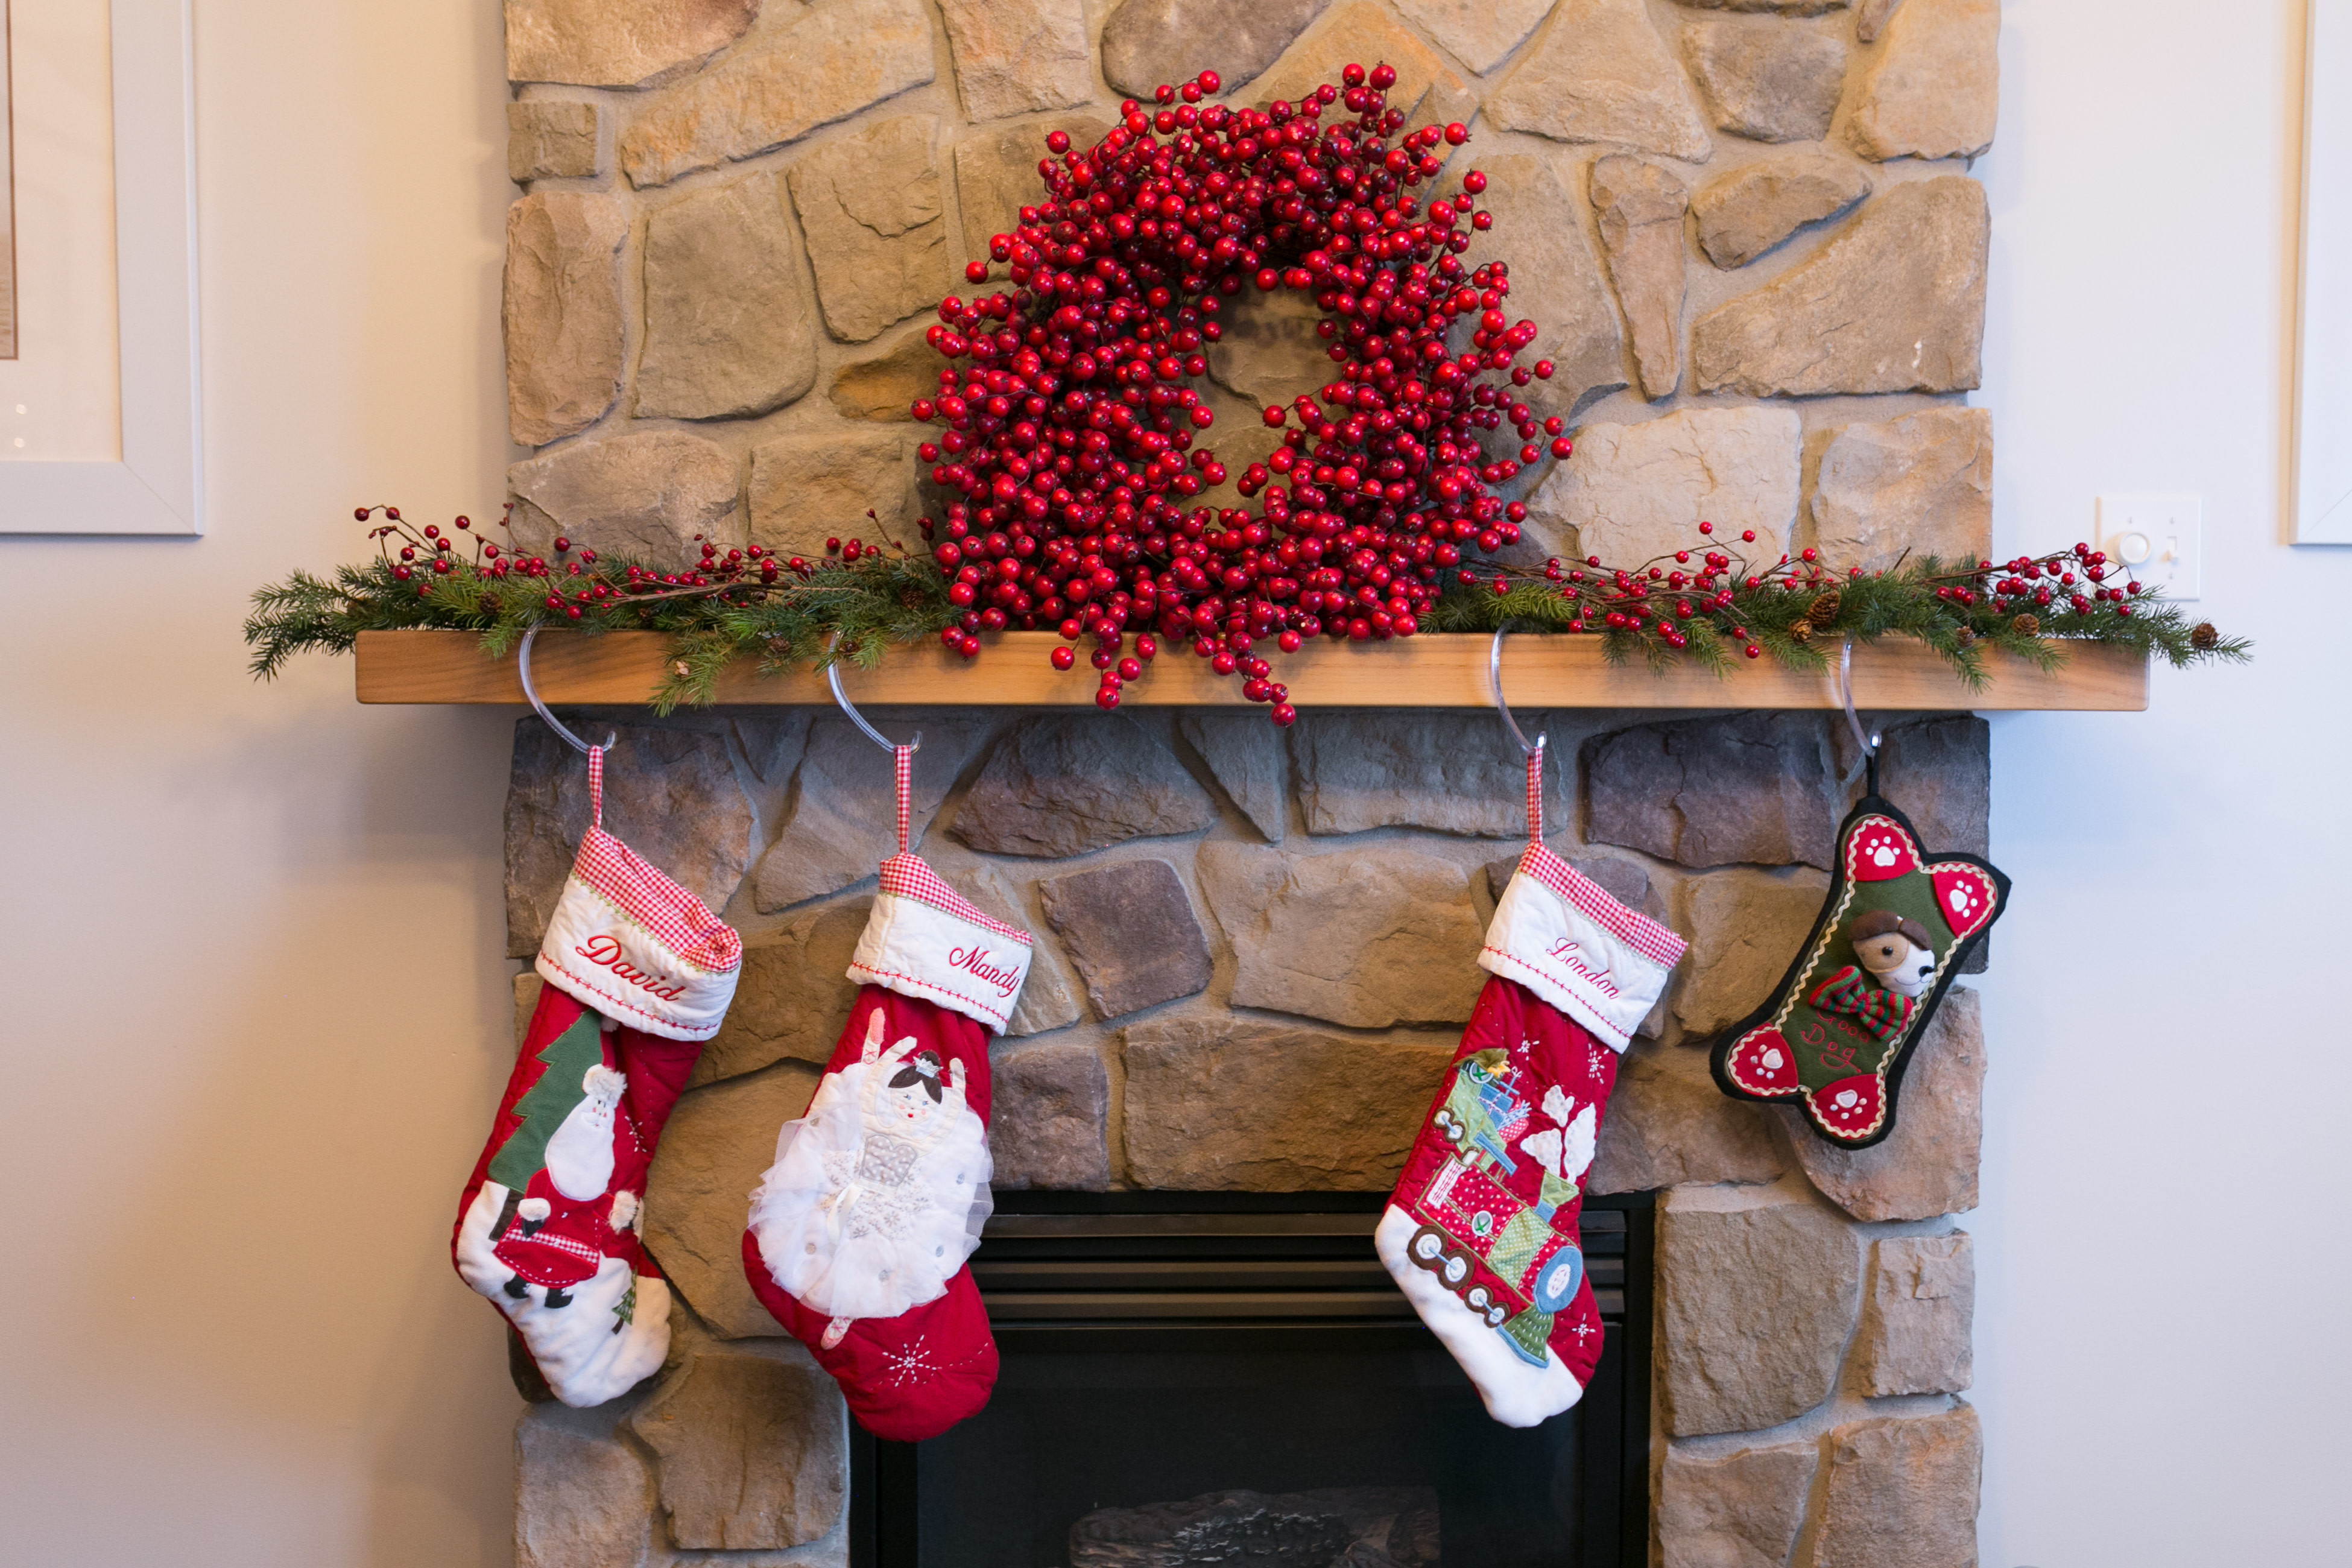 Decorating a holiday mantle